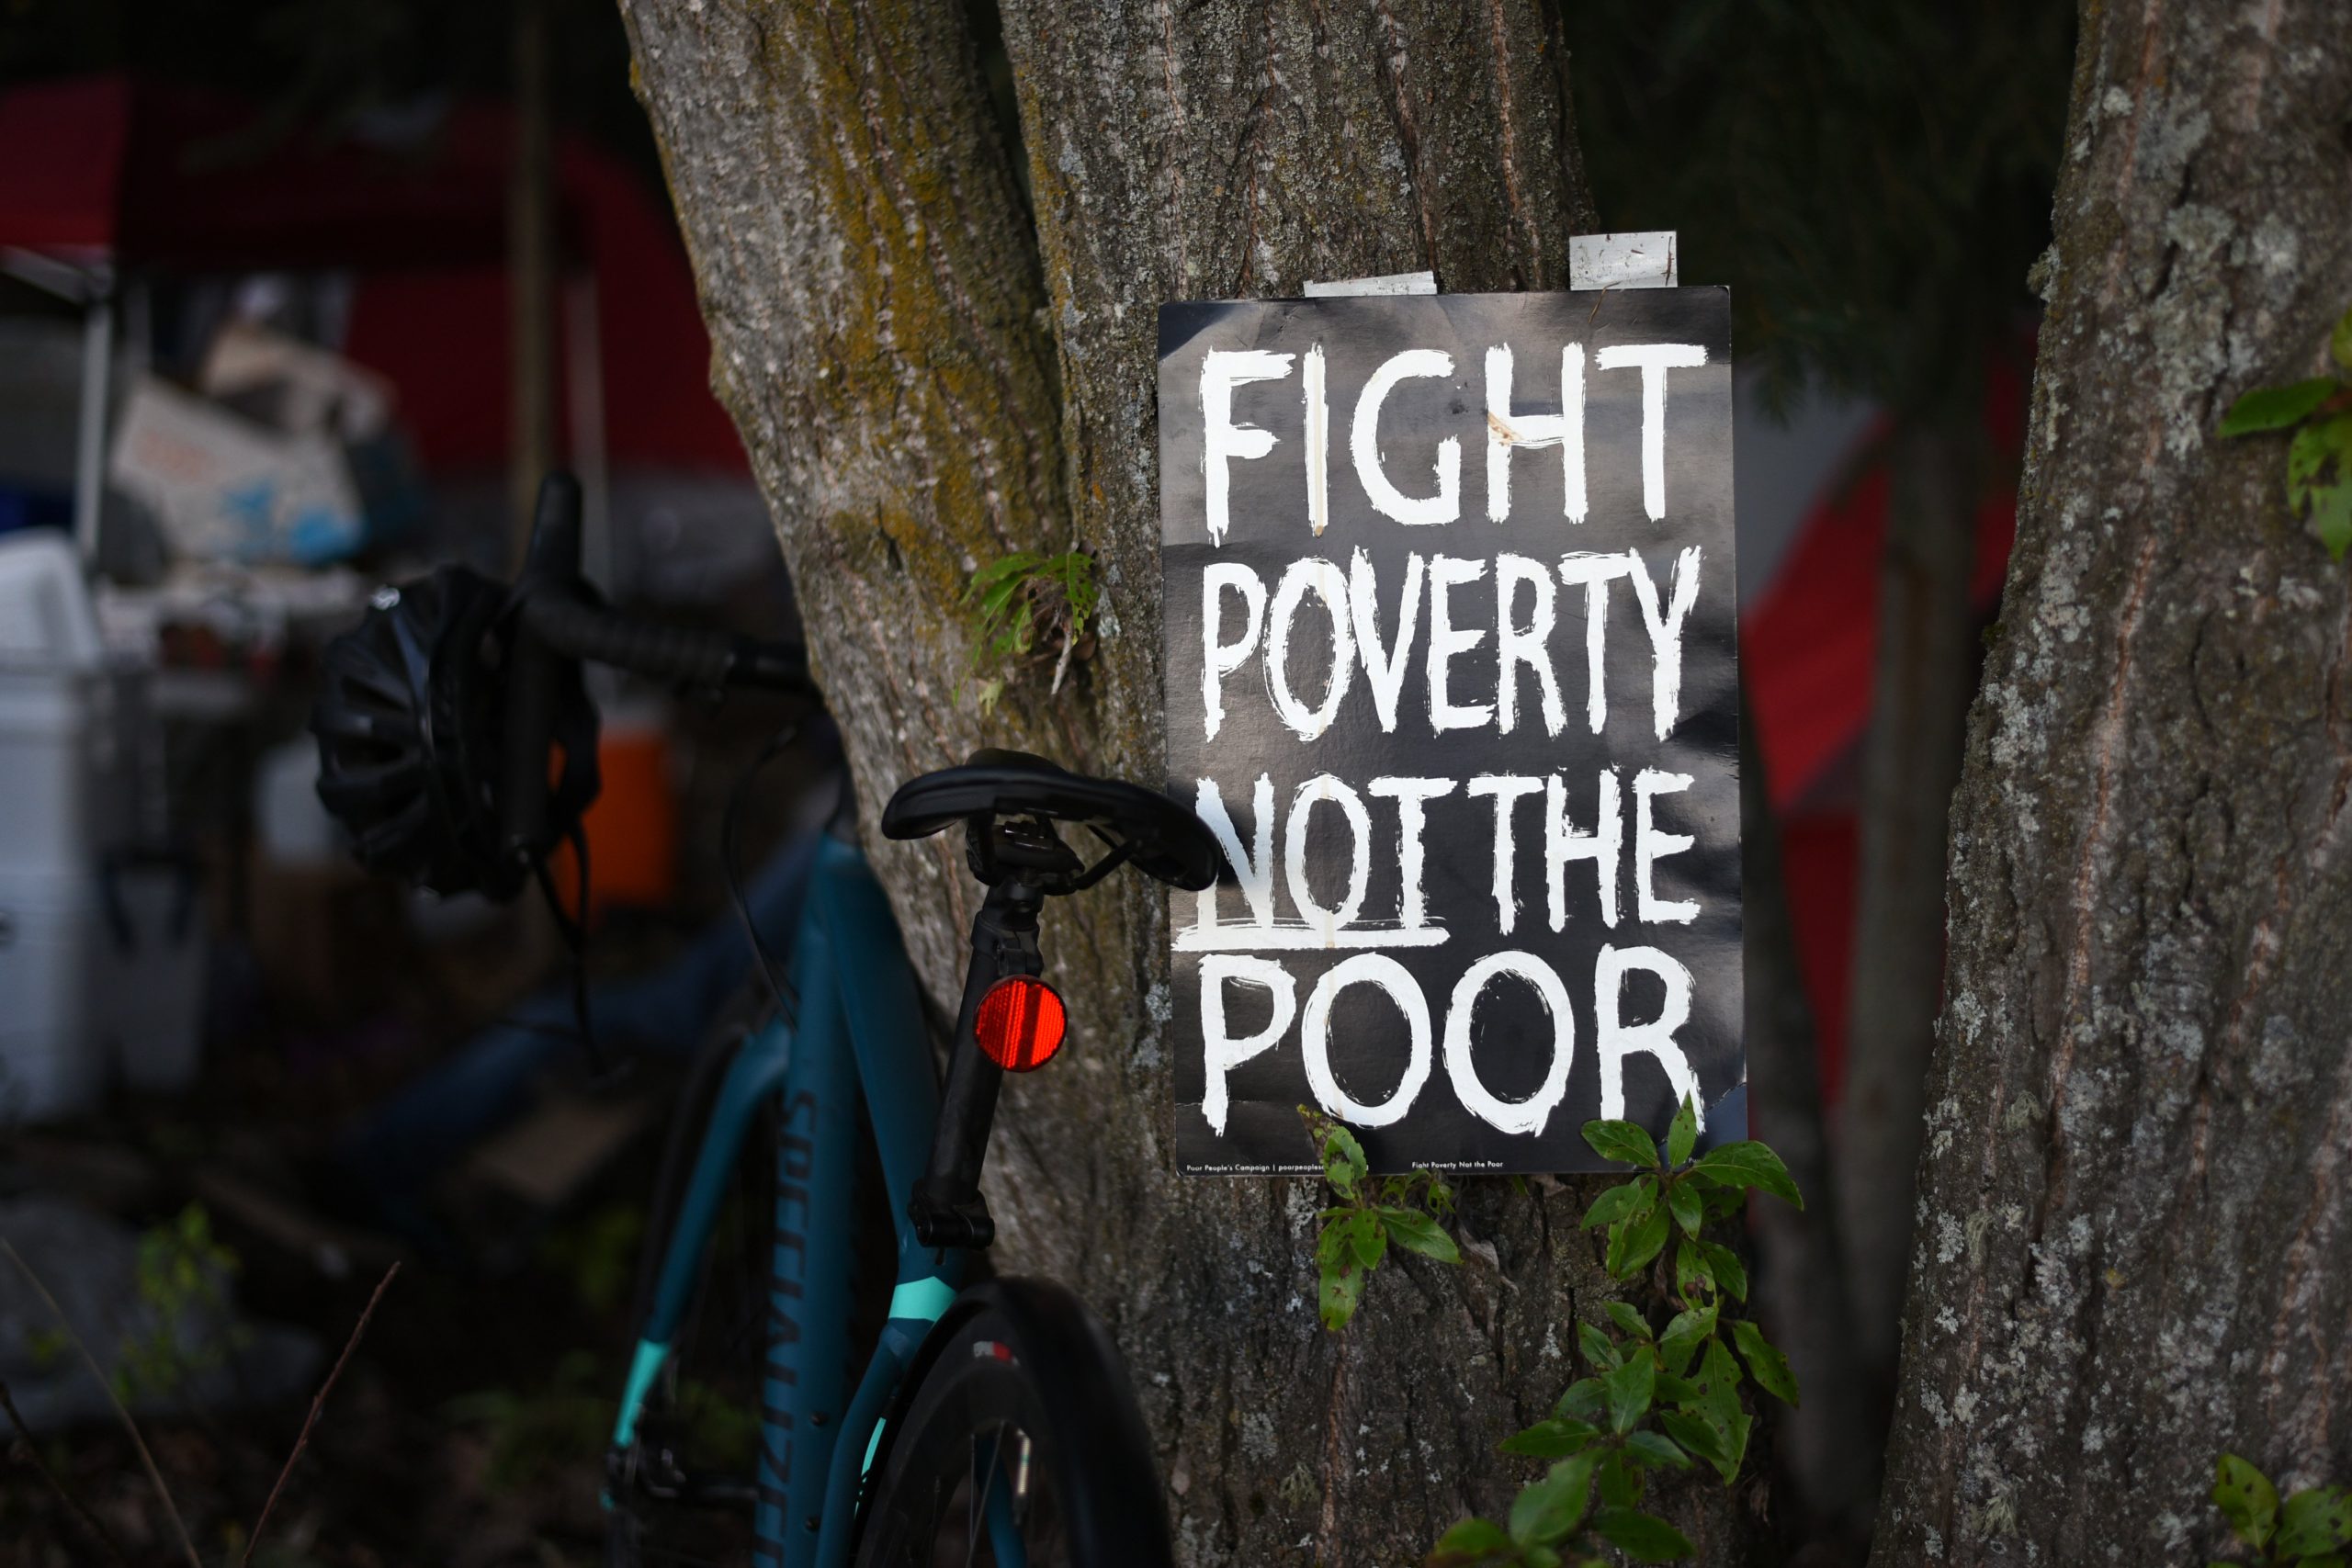 Fight Poverty Not The Poor Homeless scaled - Bucks County Beacon - How Should We Define Homelessness?